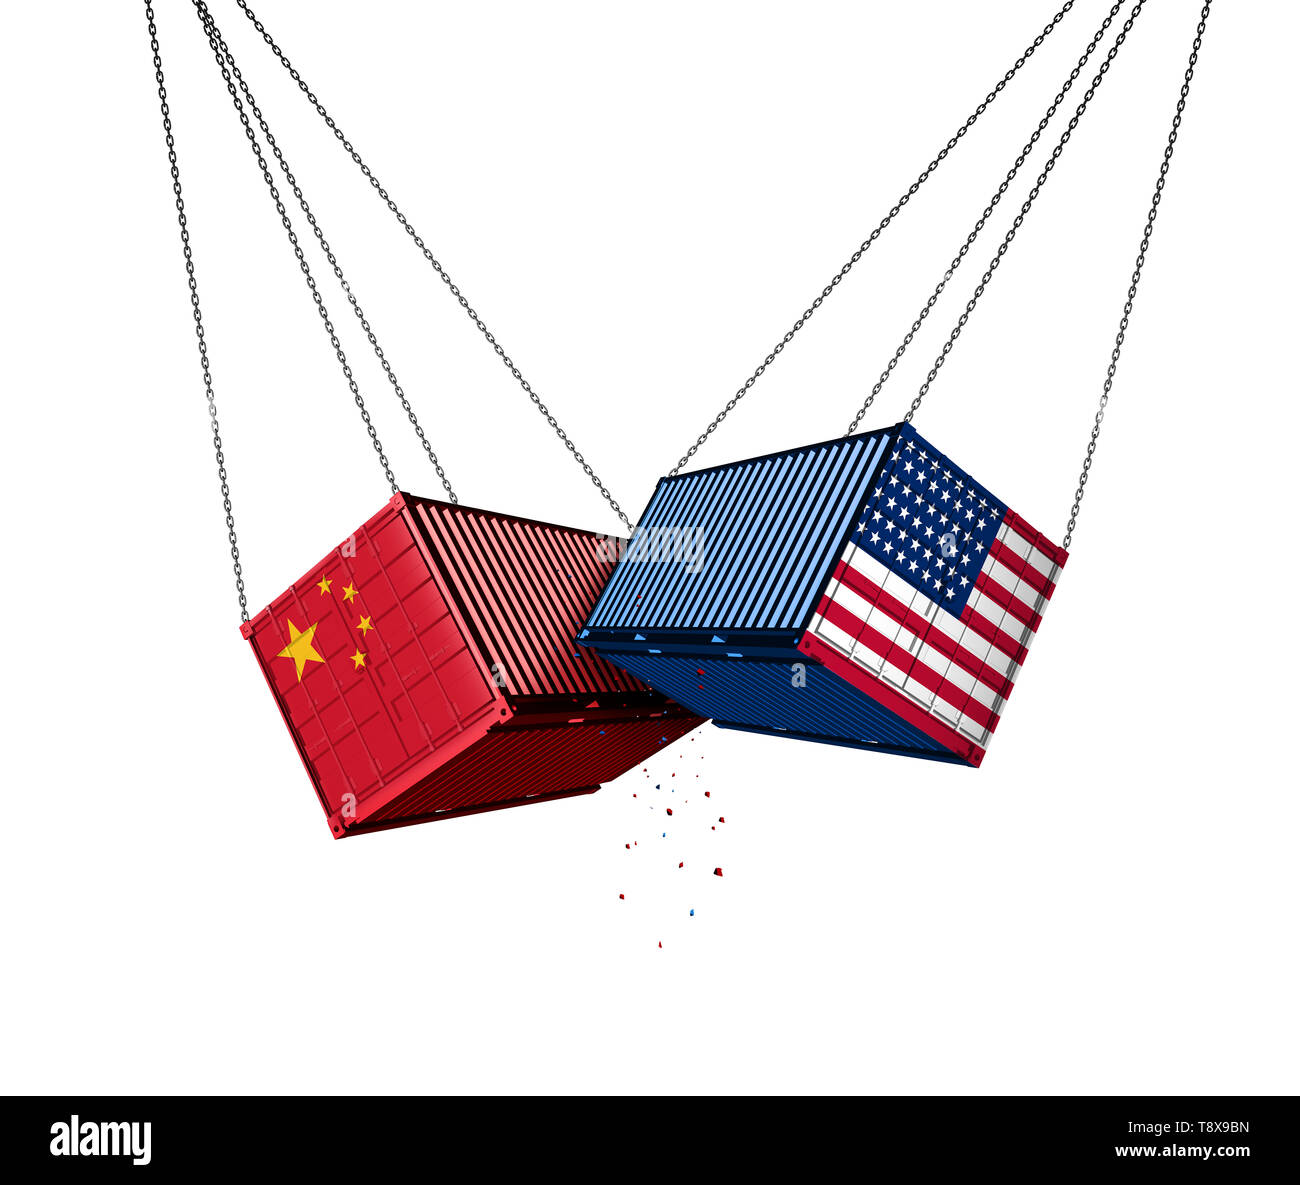 USA and China trade war and American tariffs as two opposing cargo freight containers in conflict as an economic dispute over import and exports. Stock Photo